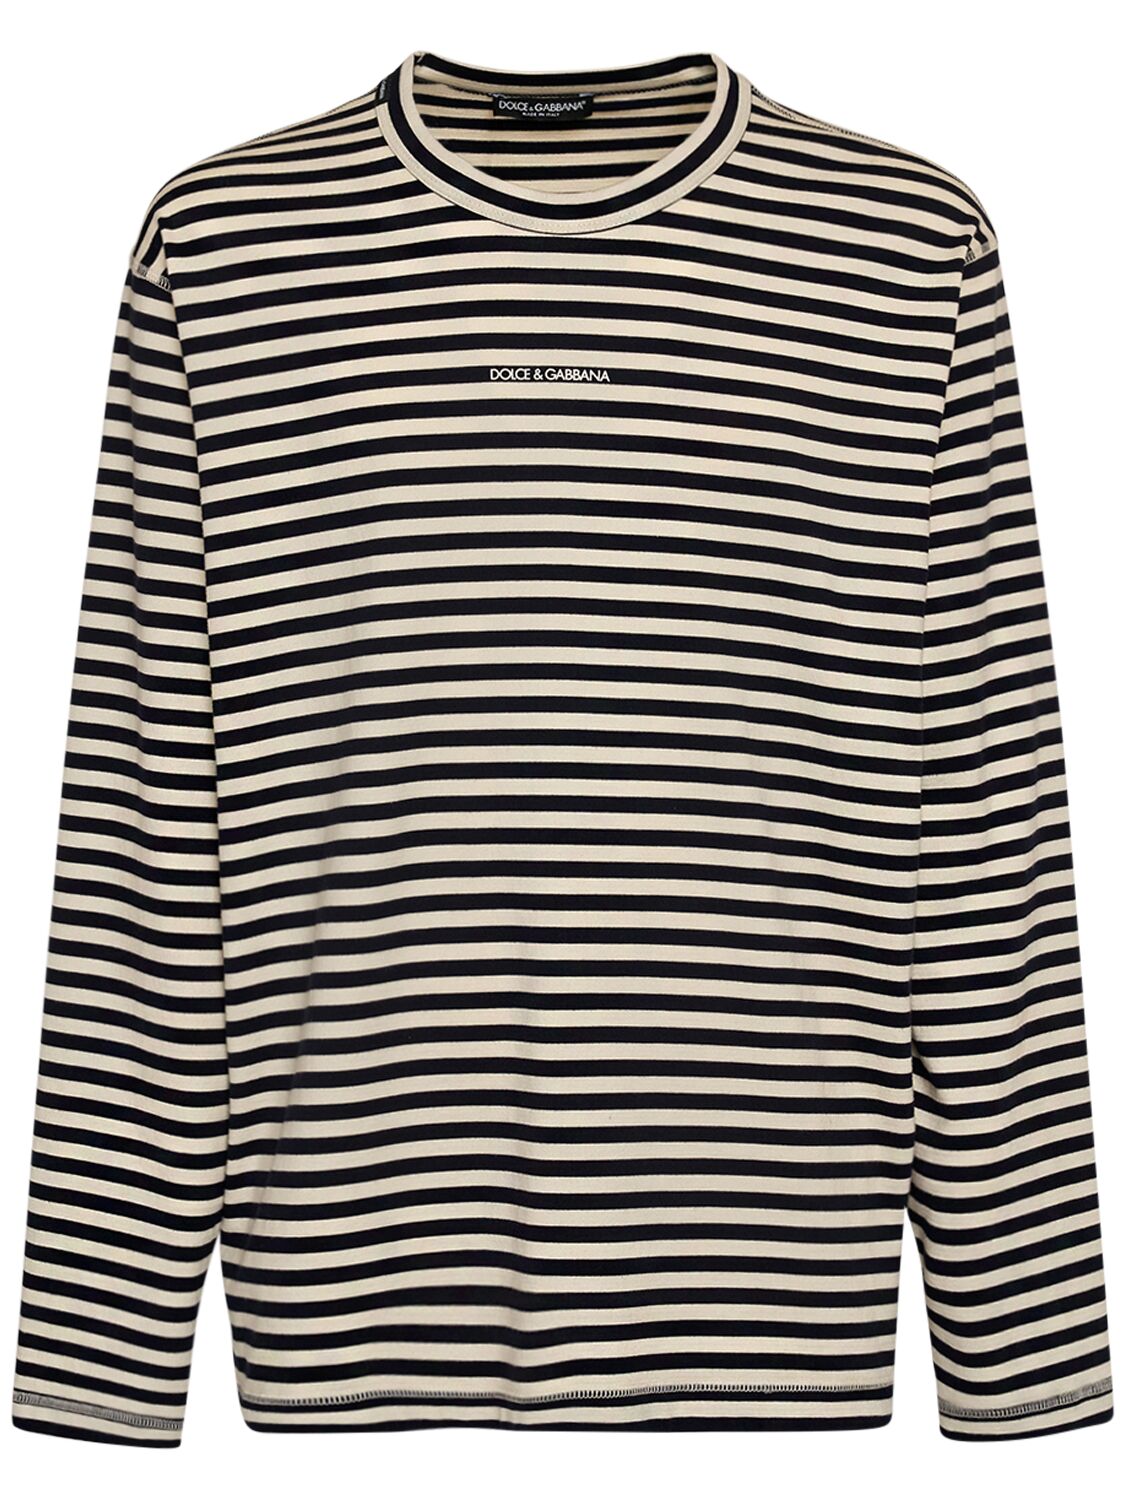 Image of Striped Cotton Jersey T-shirt